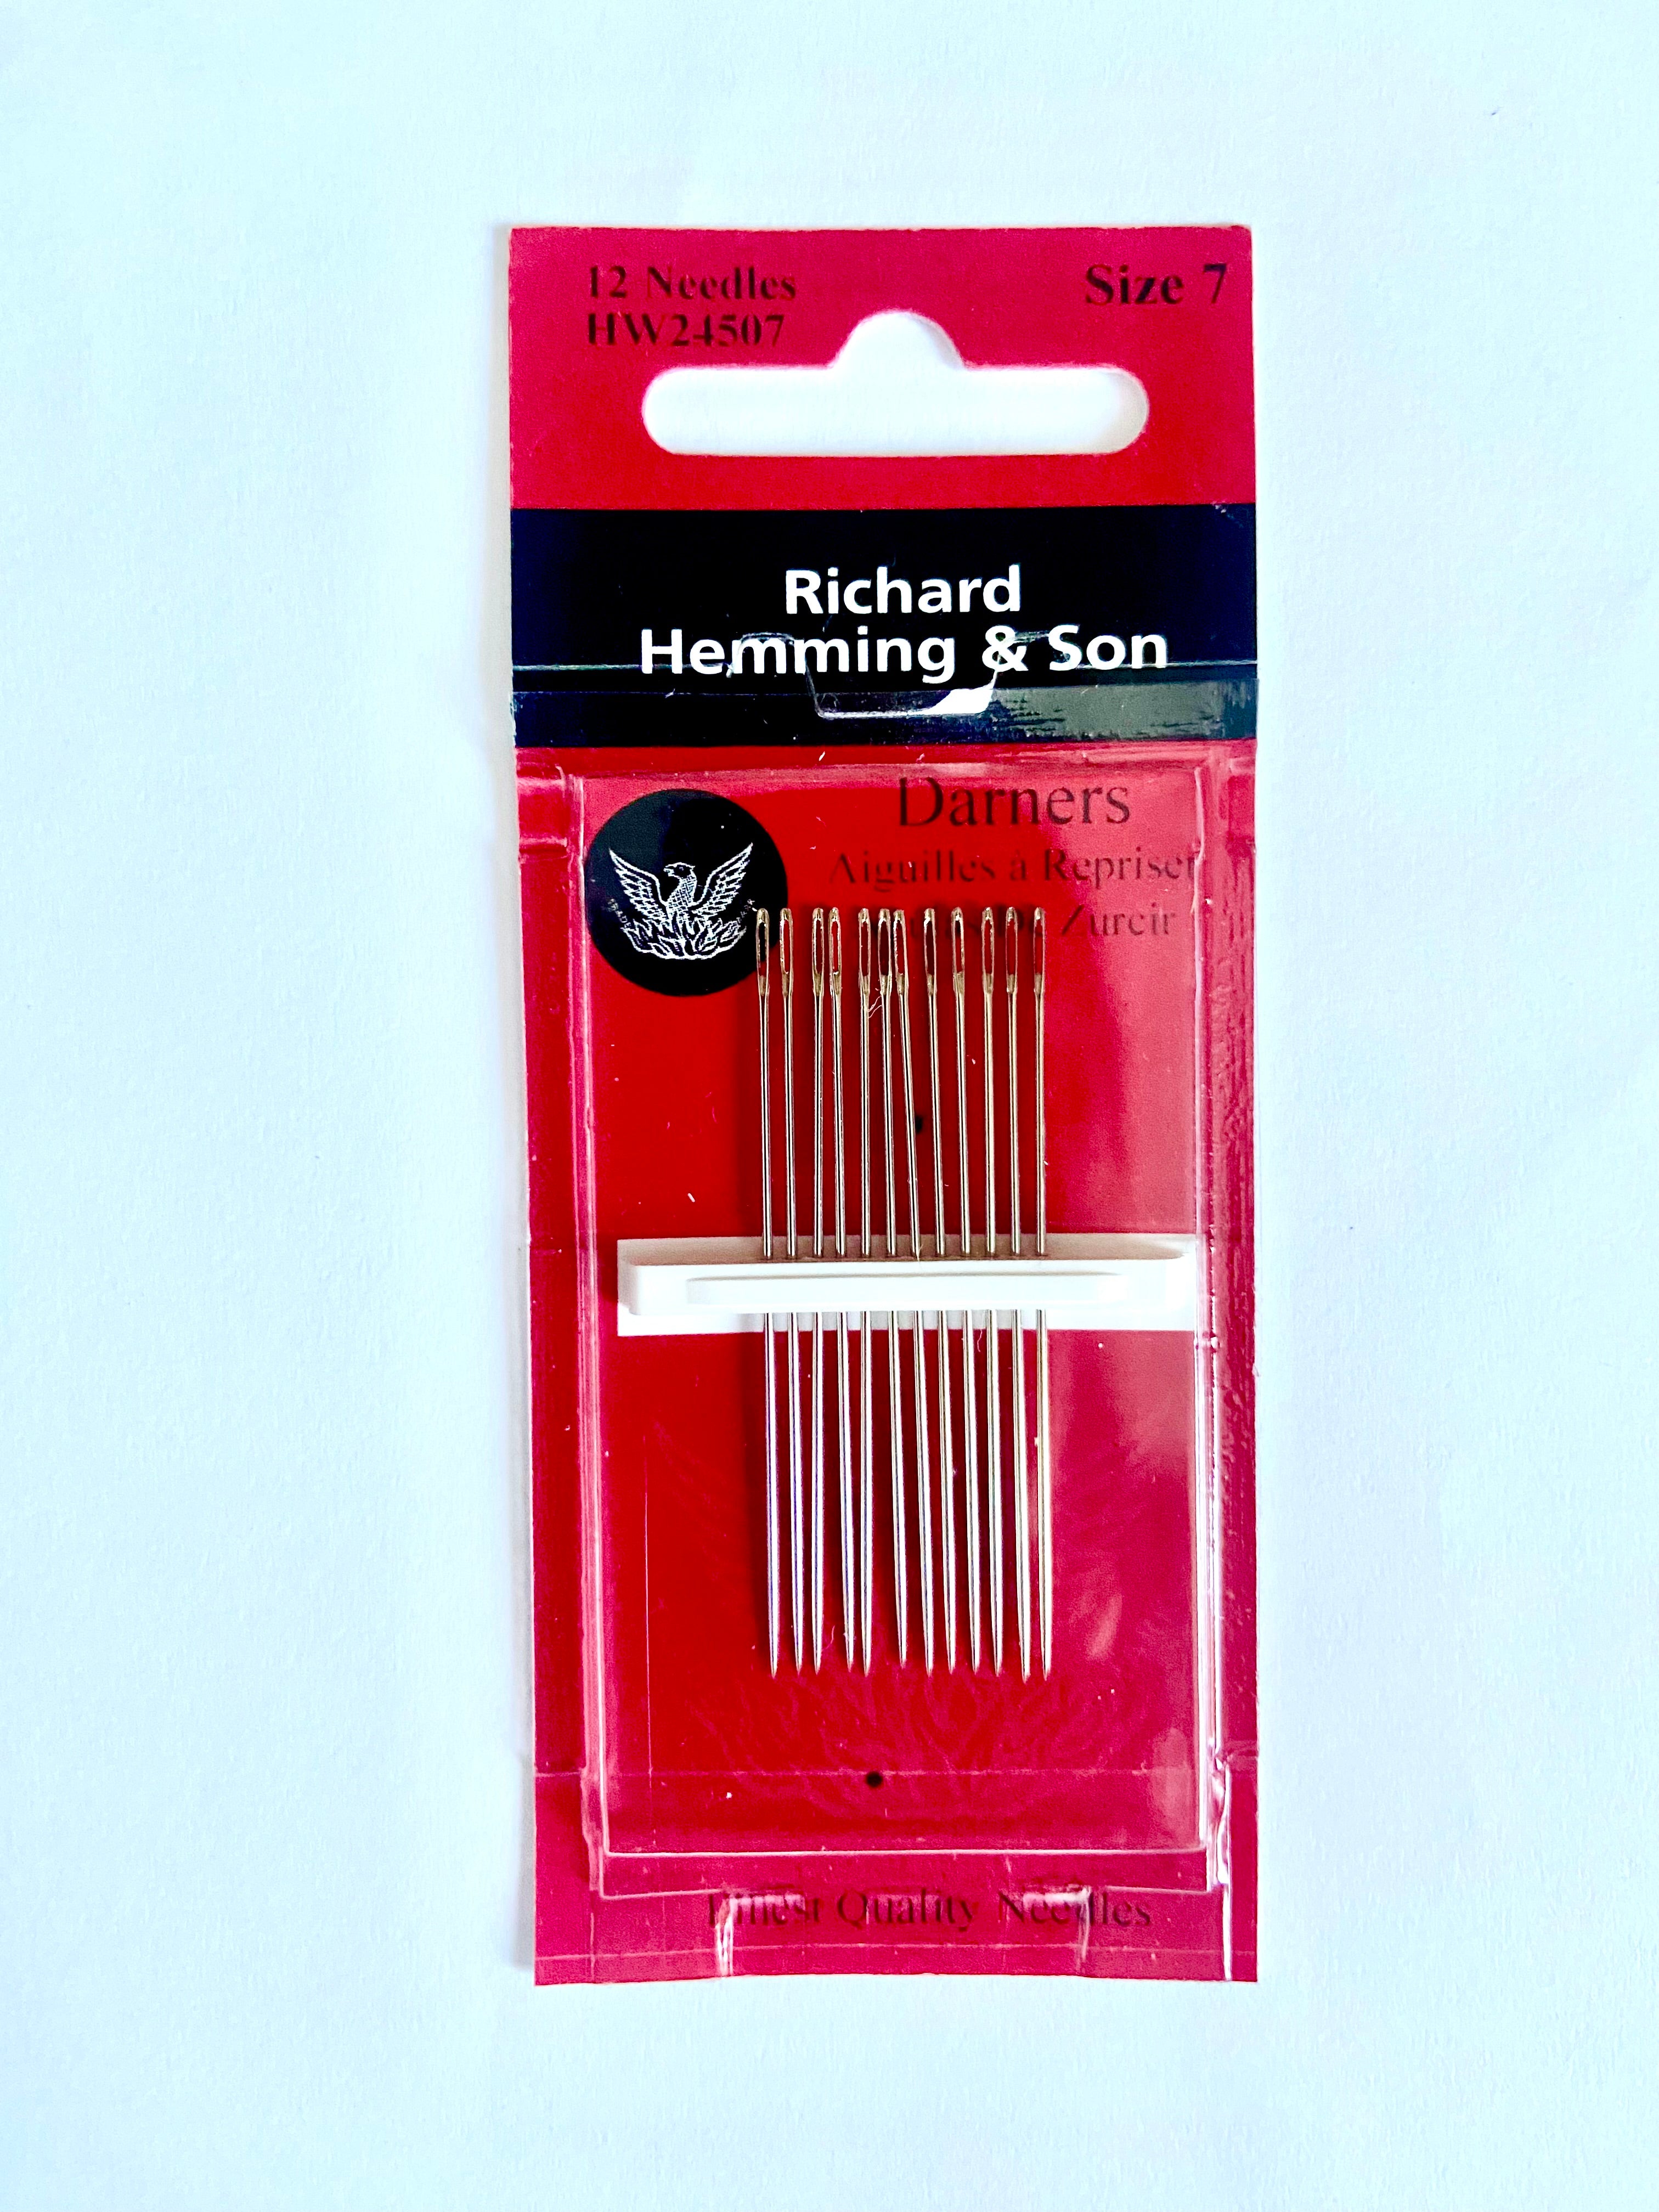 Colonial Needle 12 Count Richard Hemming Darners Needle, Size 7